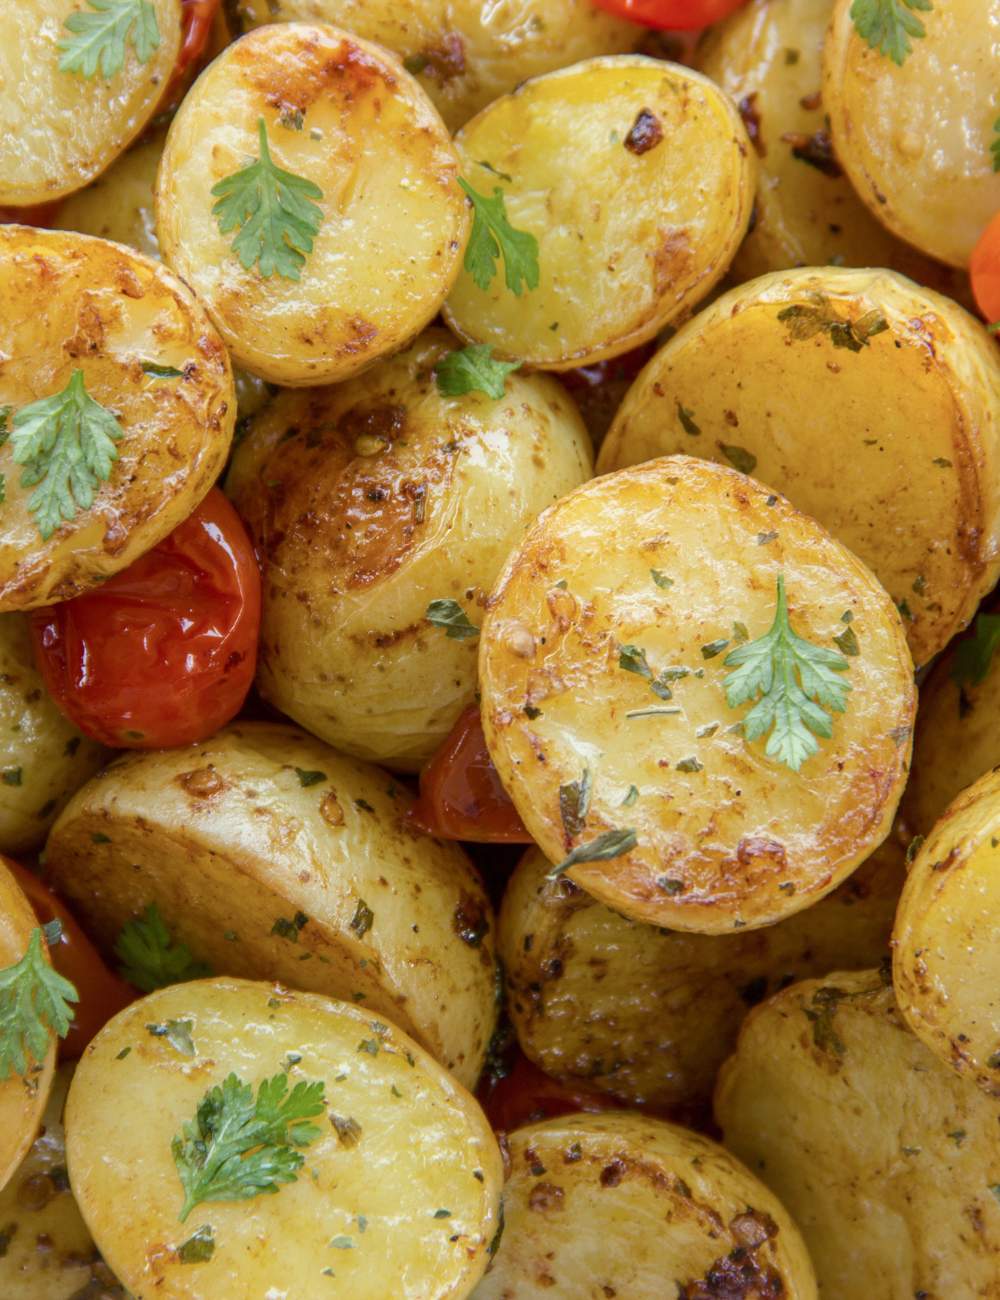 Perfectly grilled potatoes, ready to be eaten!